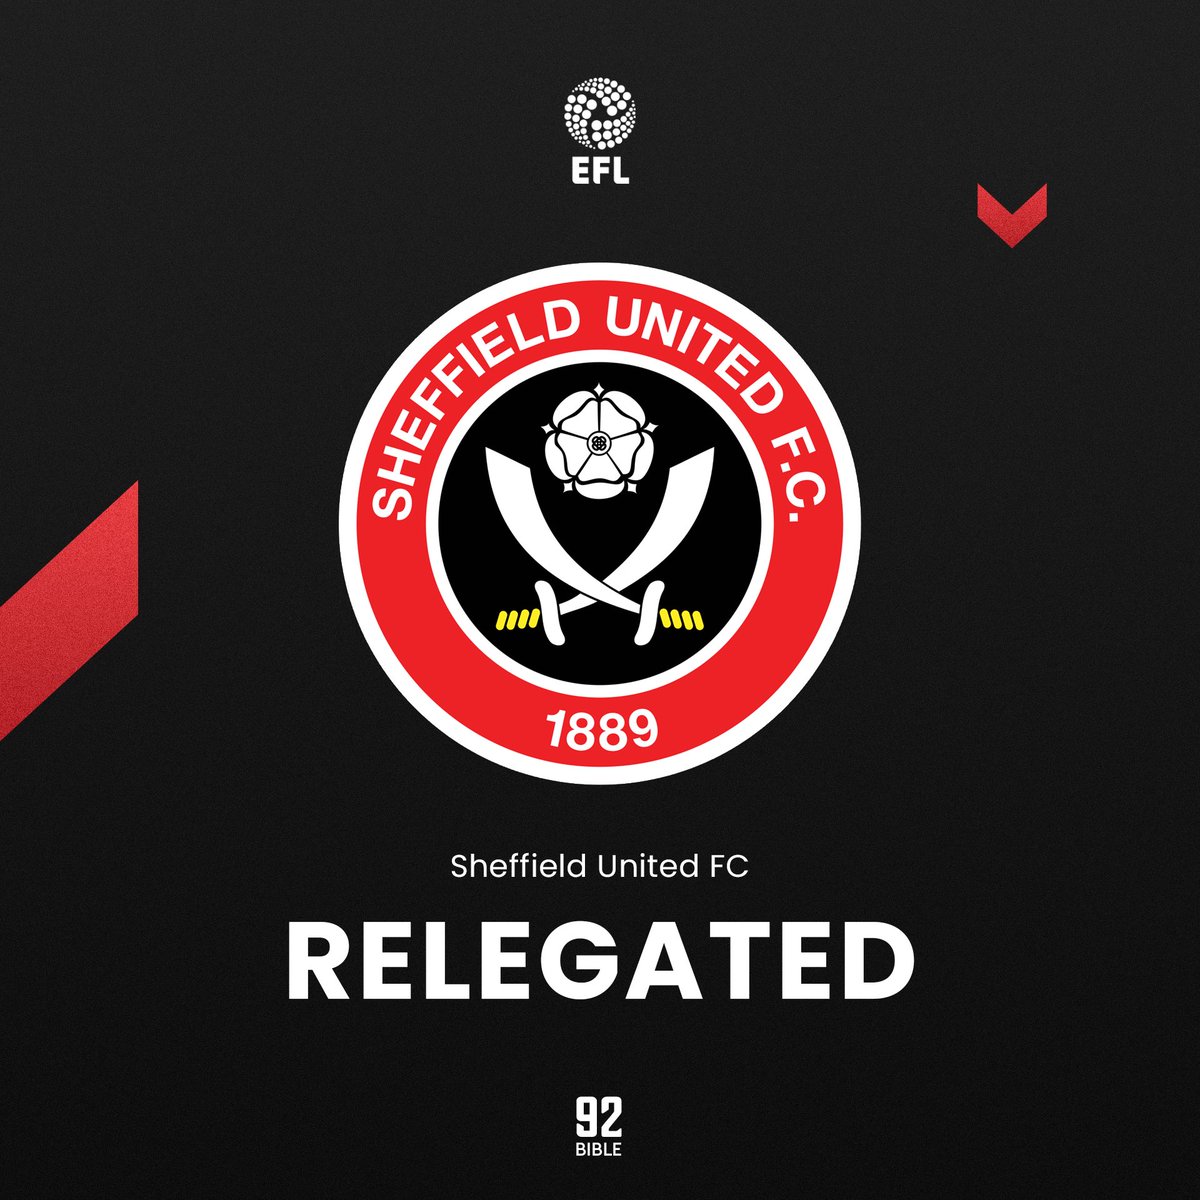 🚨SHEFFIELD UNITED RELEGATED TO THE CHAMPIONSHIP 🚨 Sheffield United have been RELEGATED from the Premier League following their 5-1 loss away at Newcastle United this afternoon… Chris Wilder’s side will play in the Championship next season ⚔️🔴